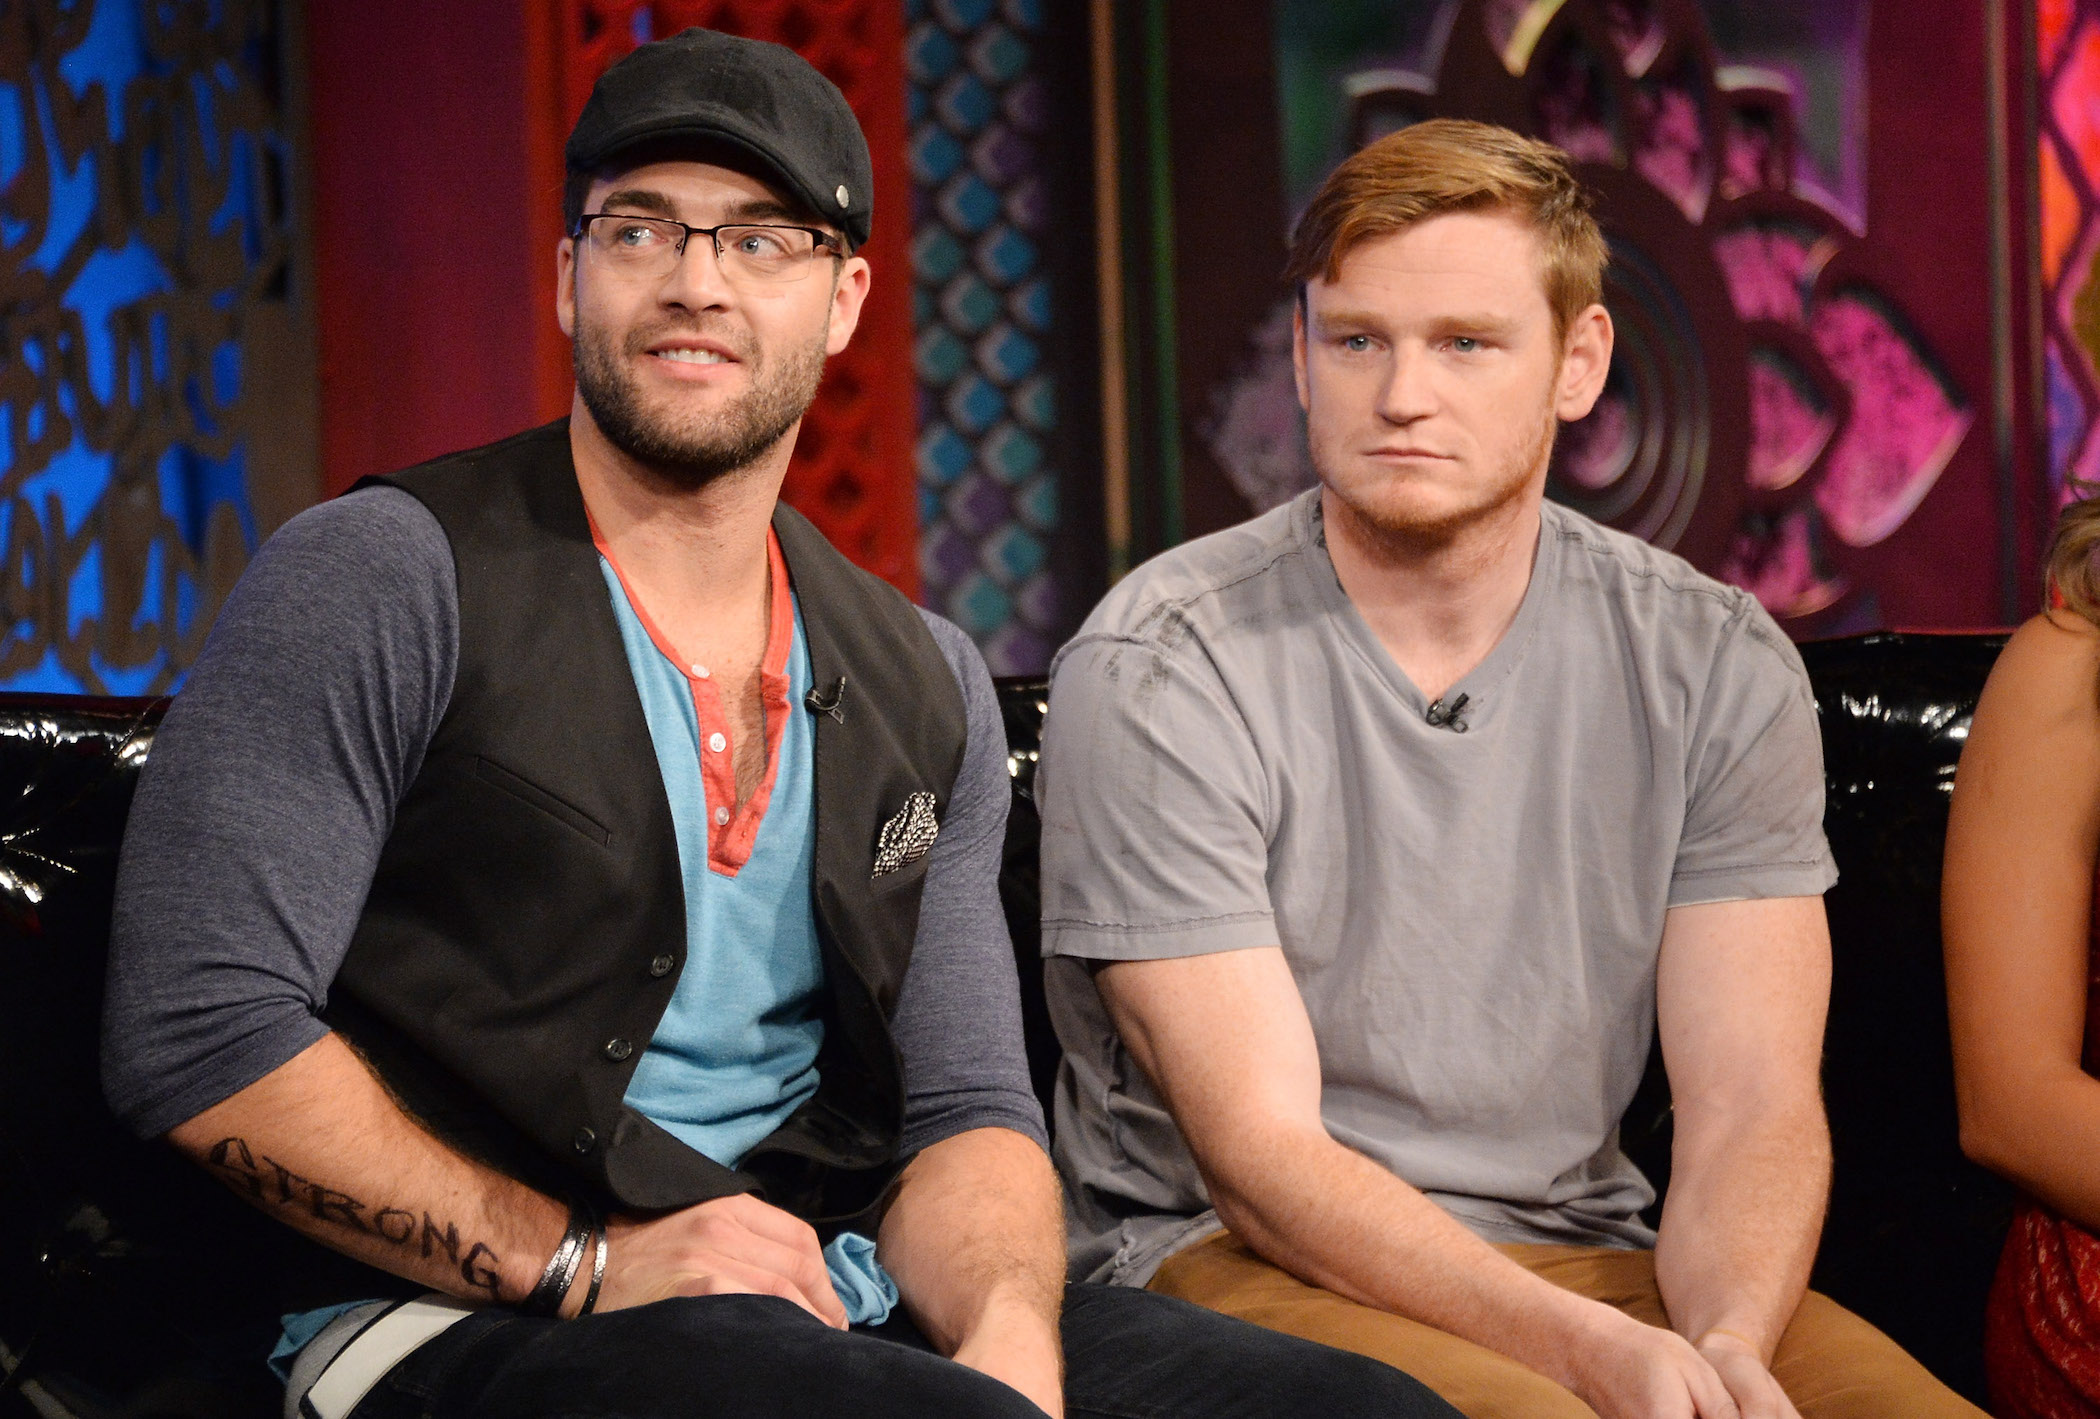 CT Tamburello and Wes Bergmann from MTV's 'The Challenge' sitting together at a reunion show